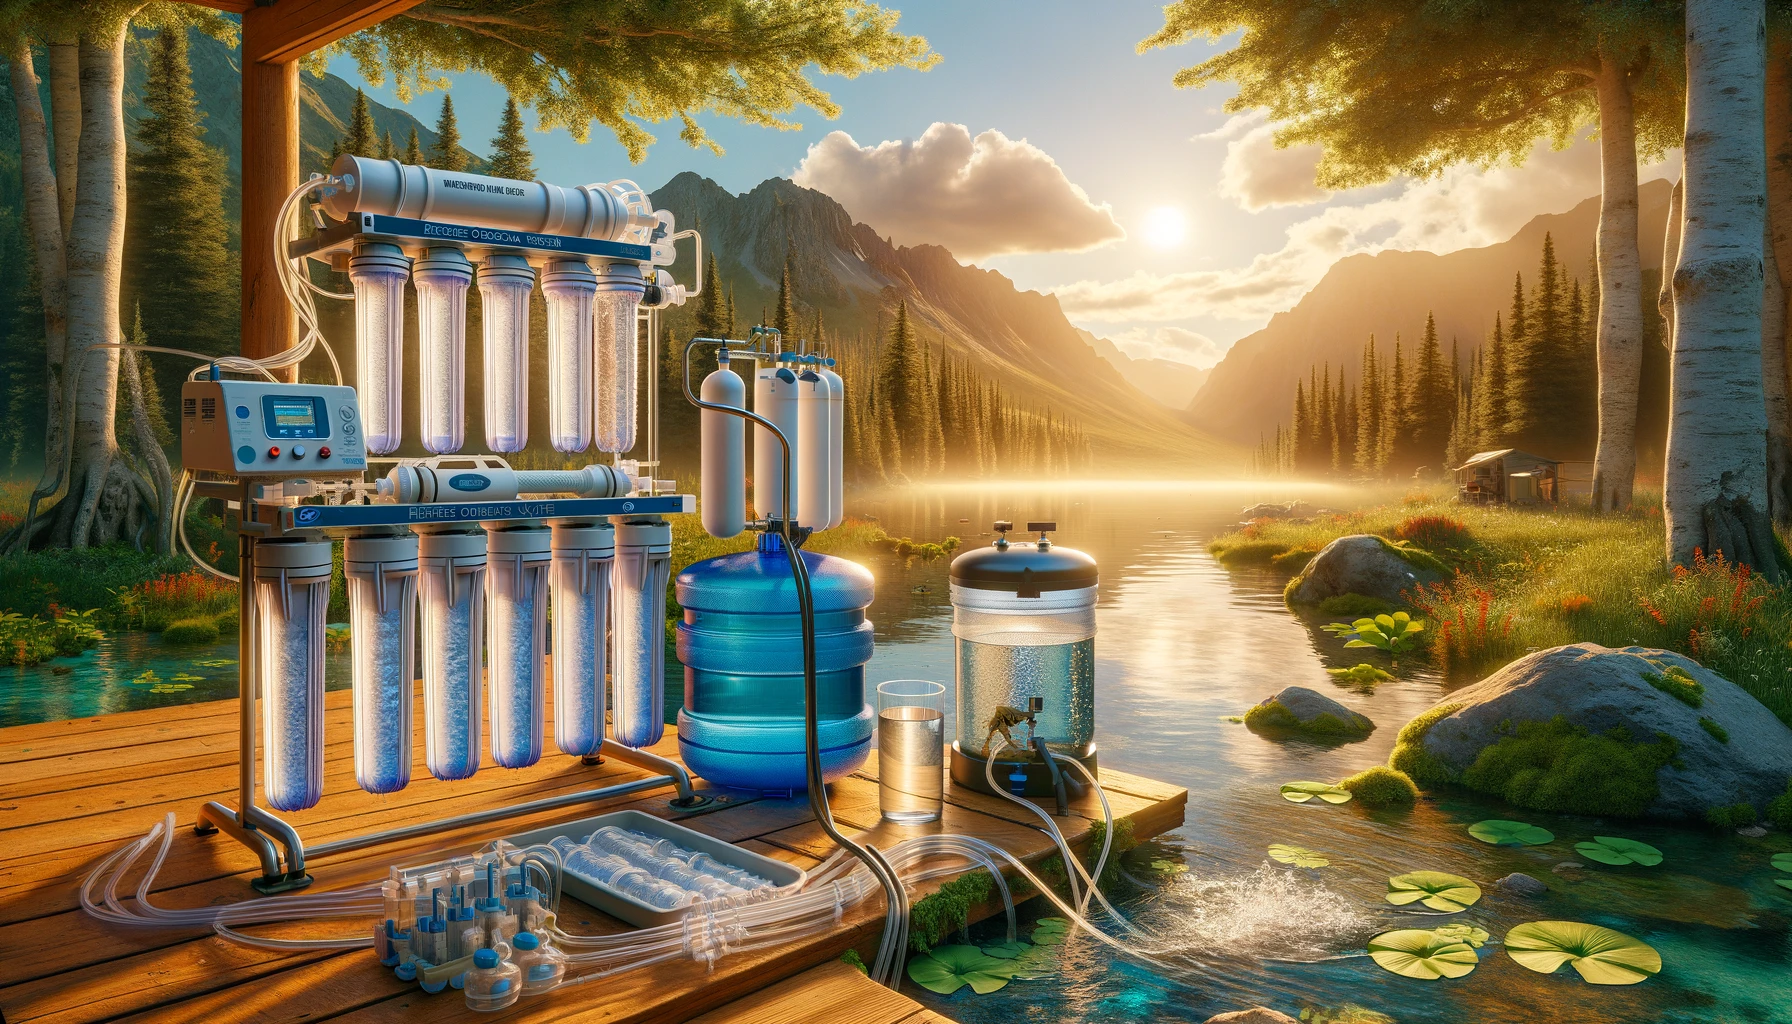 High-tech reverse osmosis and Berkey water filter systems in an off-grid outdoor setting, connected to clear water tanks against a serene wilderness backdrop with a pristine lake, highlighted by golden hour sunlight to showcase the pursuit of pure, uncontaminated drinking water.